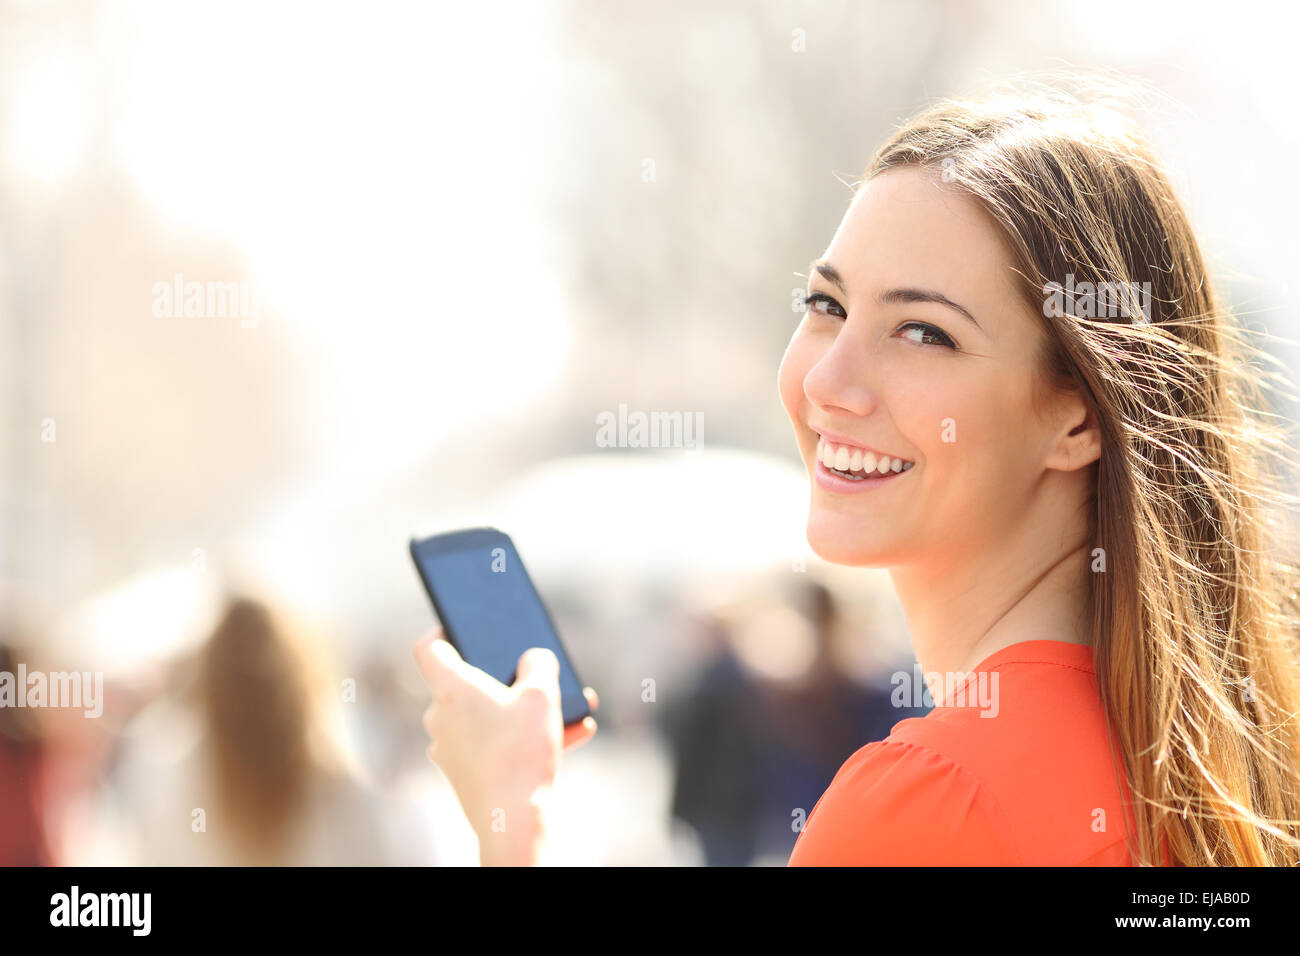 Happy woman smiling and walking in the street using a smartphone and looking at camera Stock Photo